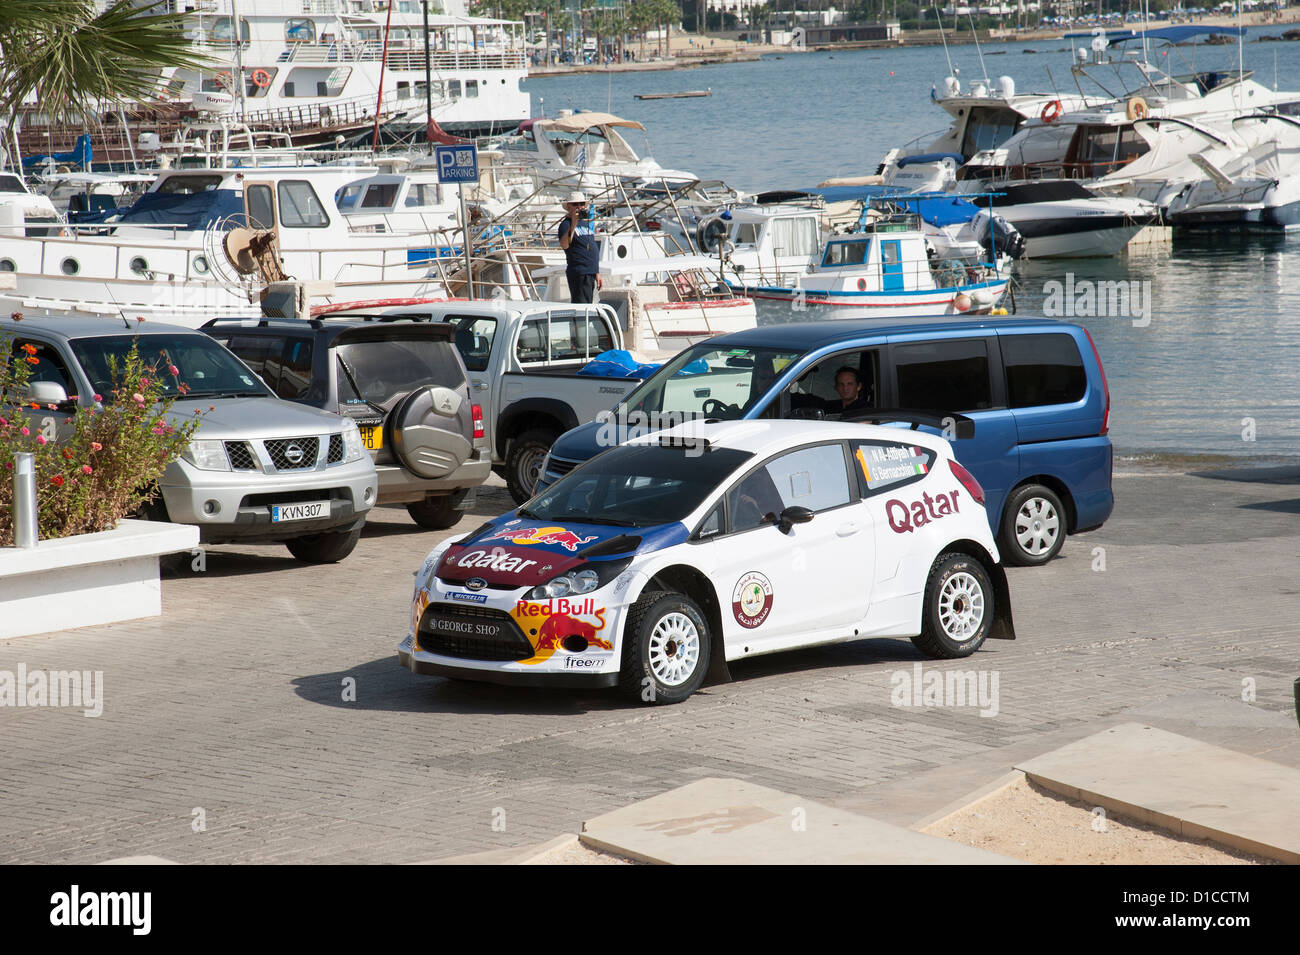 Winner of the Cyprus Rally 2012 Nassar Al Attiyah in his Ford Fiesta RRC on the harbour at Paphos Cyprus Stock Photo